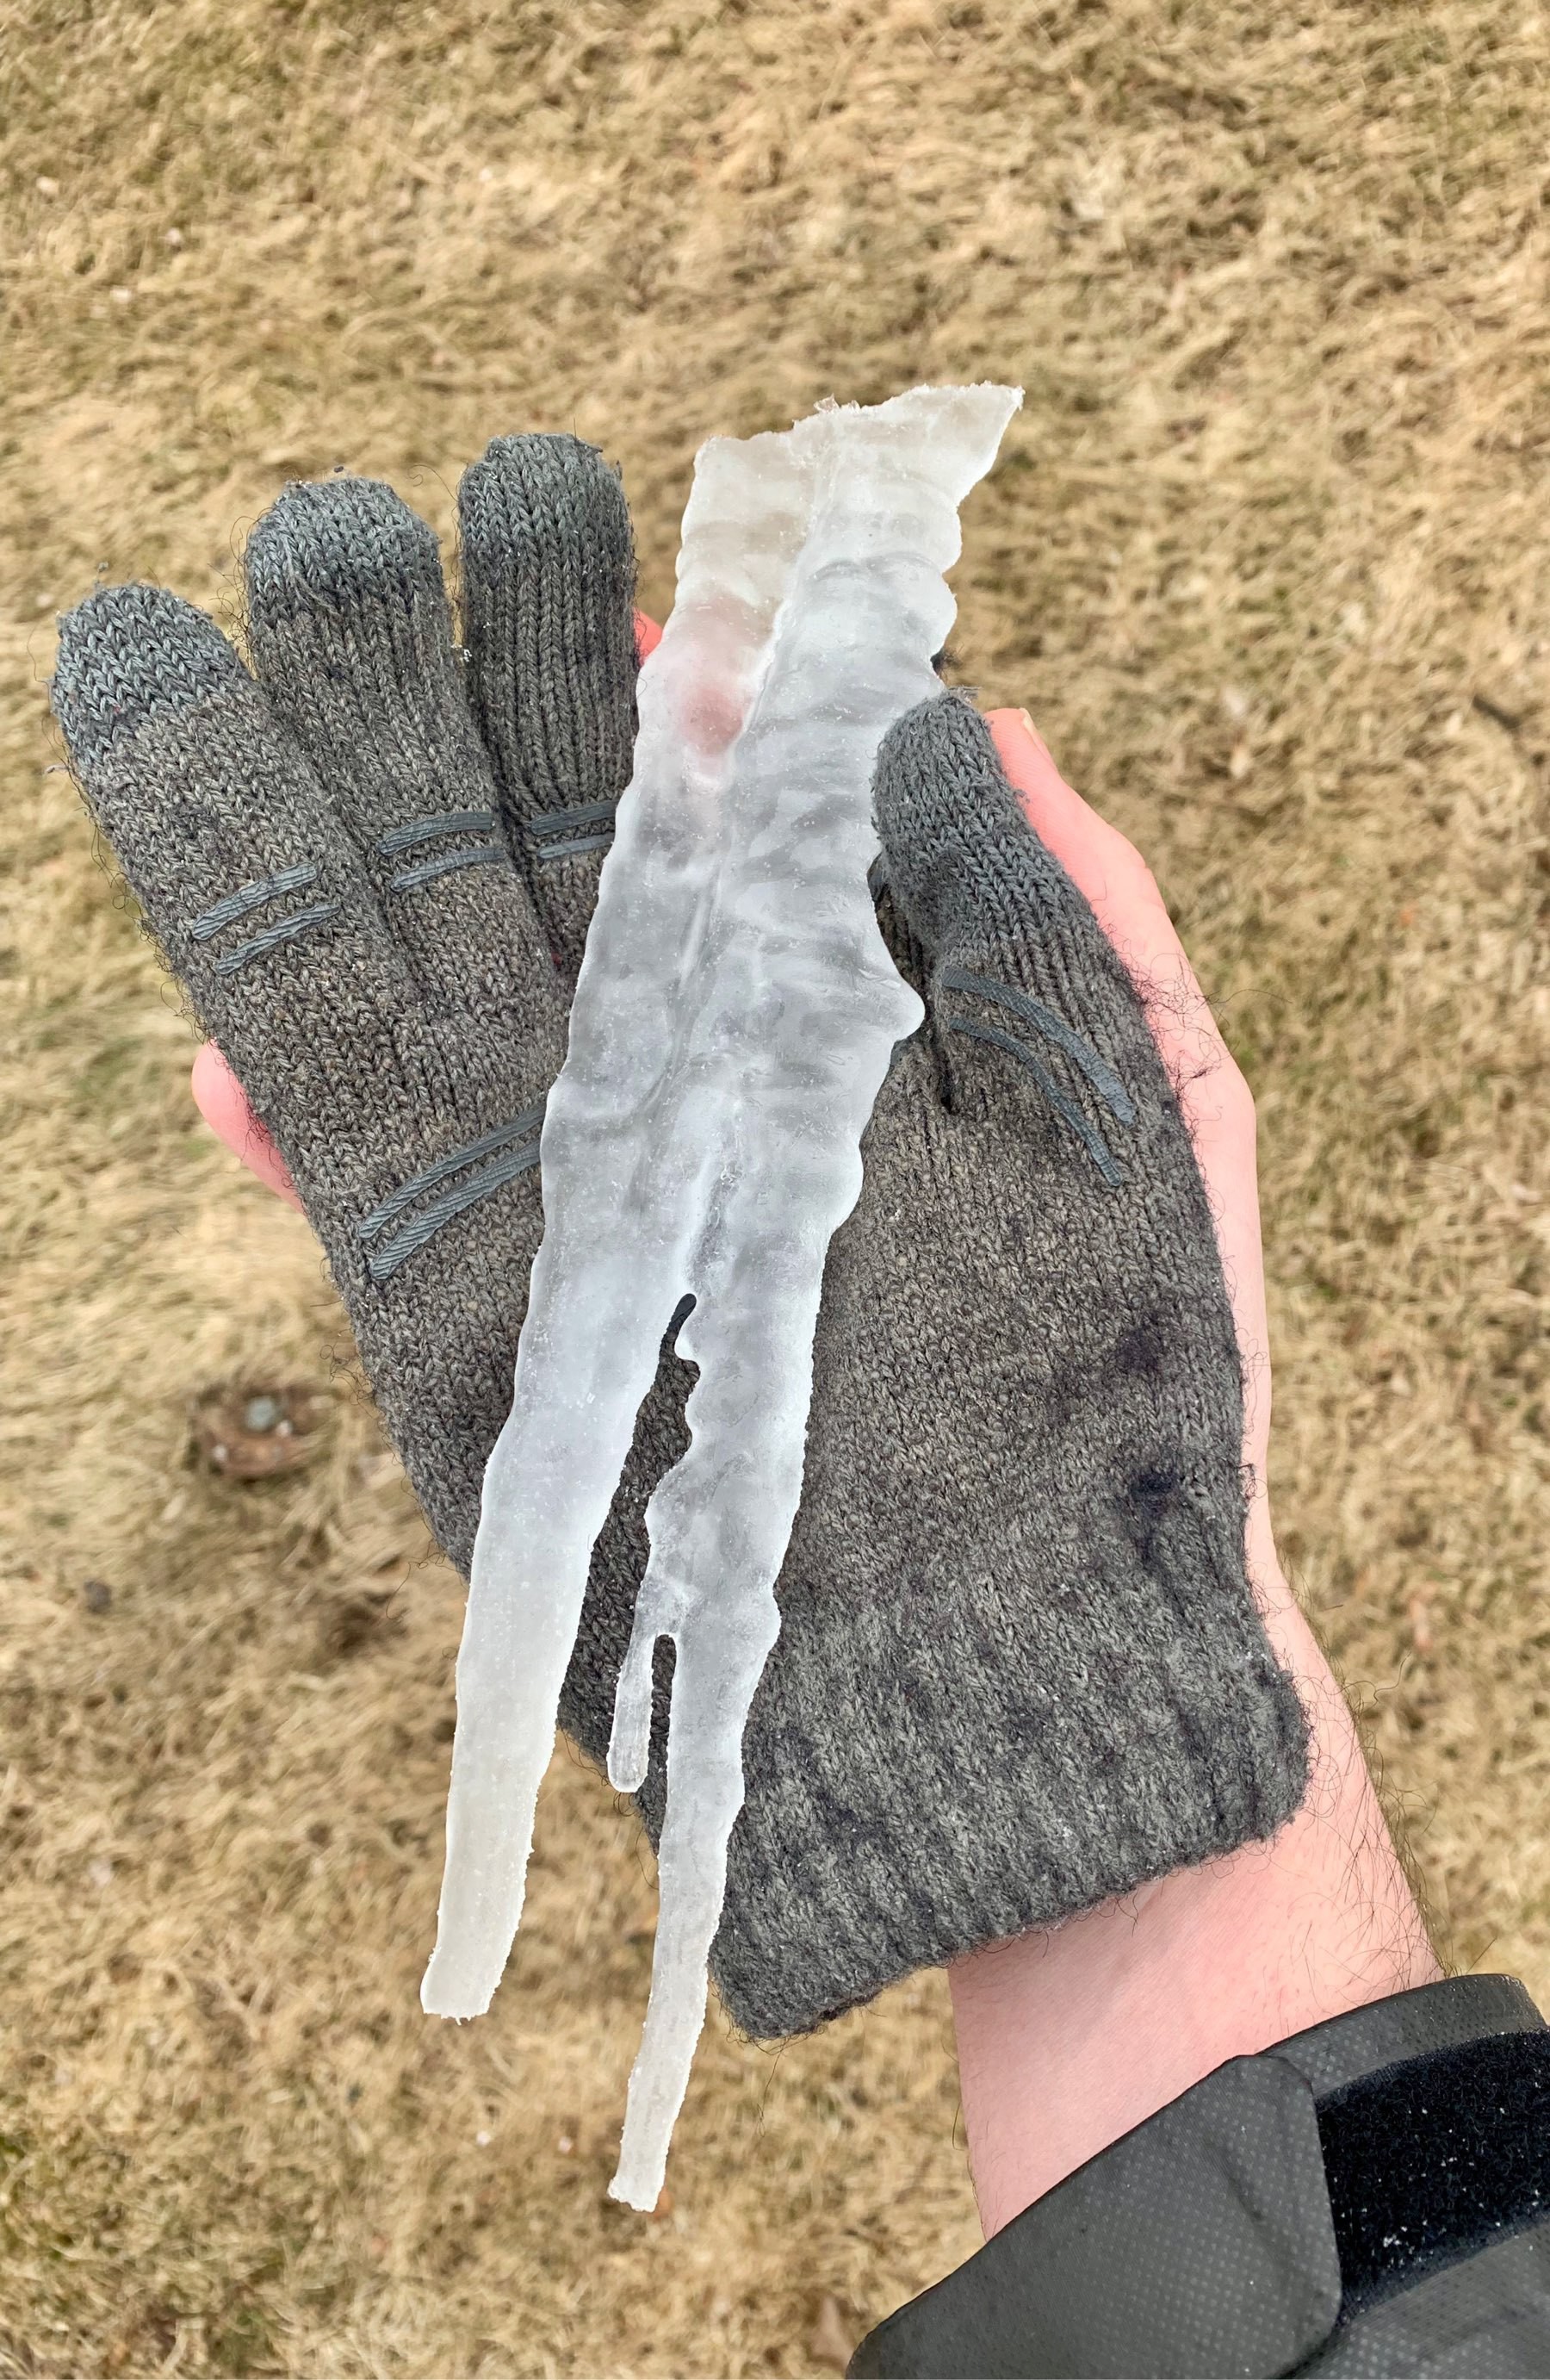 A large icicle made of sap being held in a glove